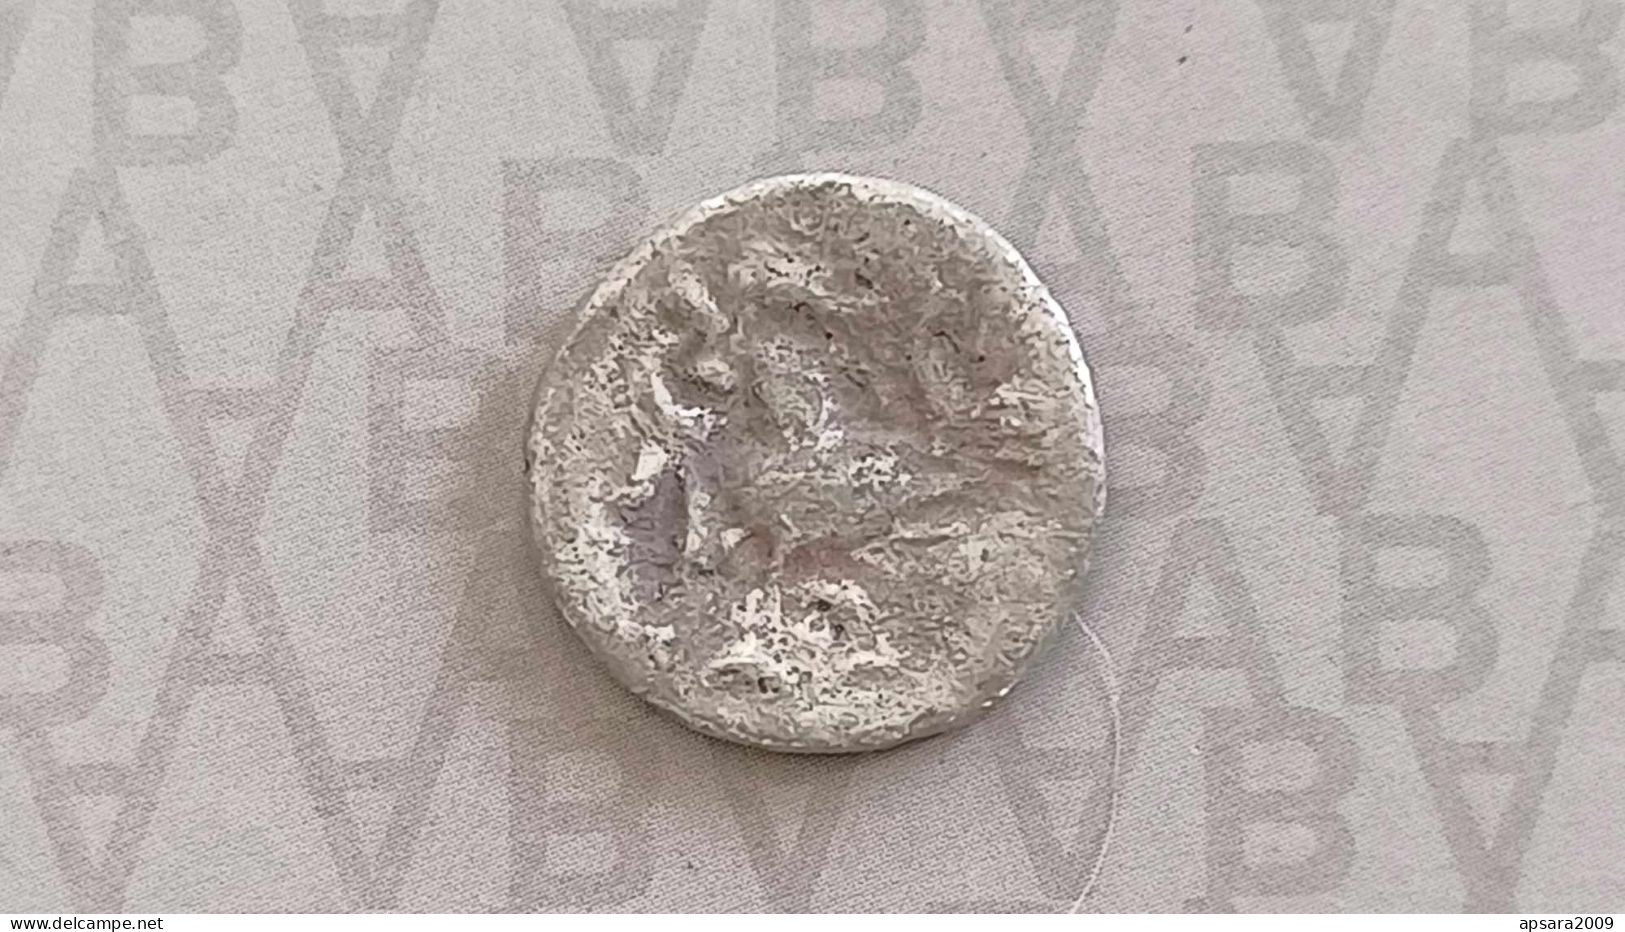 CAMBODGE / CAMBODIA/ Coin Silver Khmer Antique With Very High Silver Content - Kambodscha